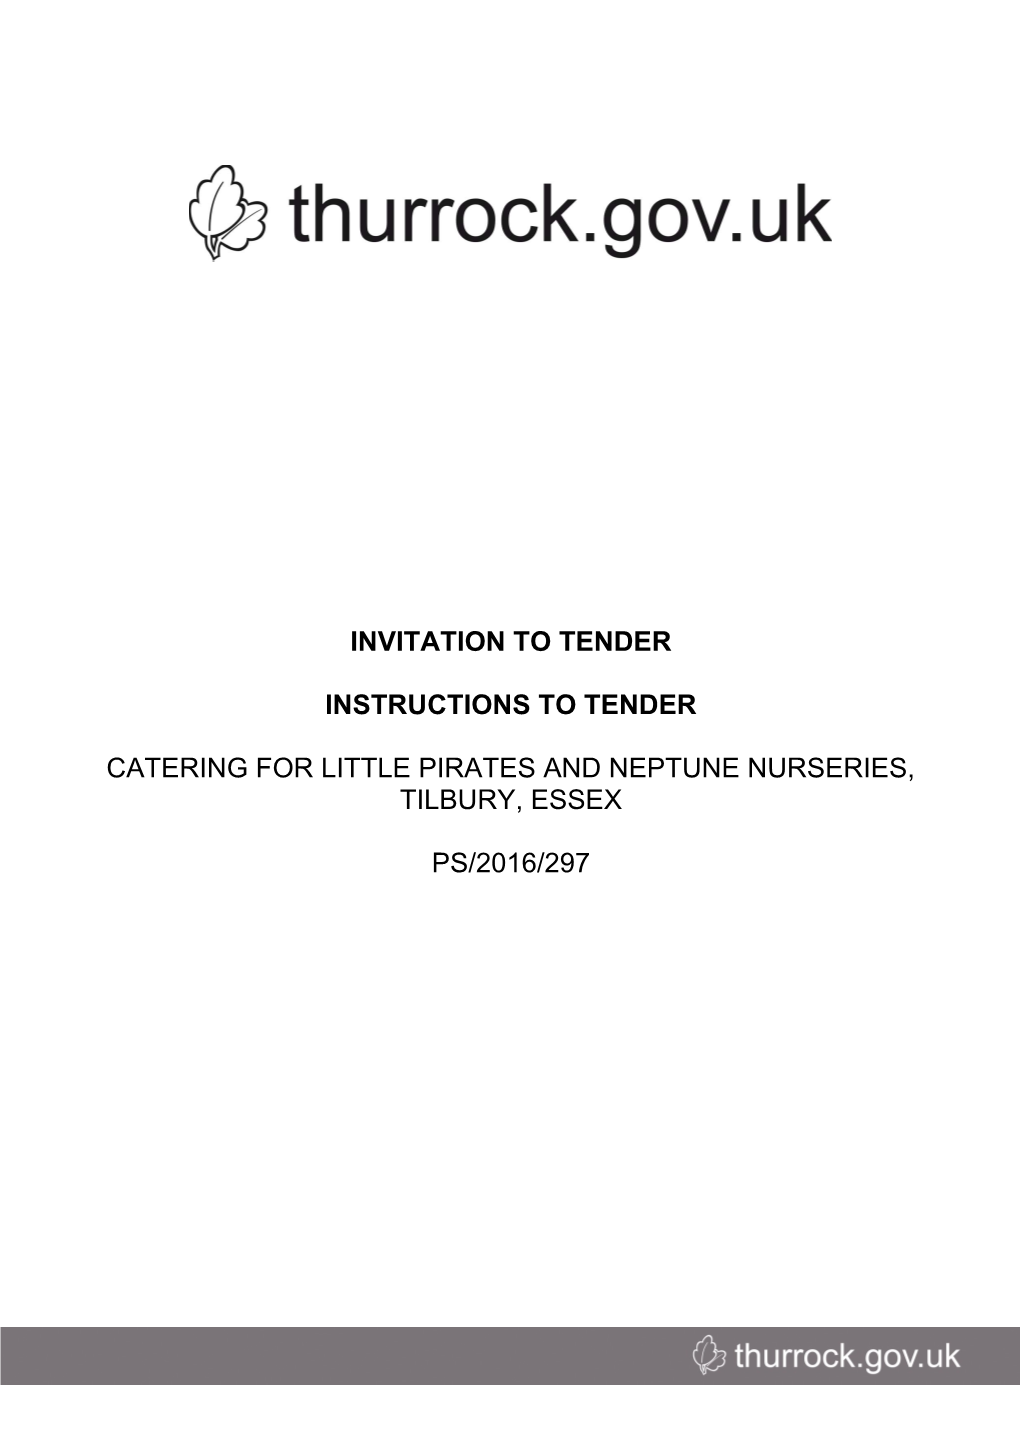 Thurrock Council - Invitation to Tender: Catering for Nurseries